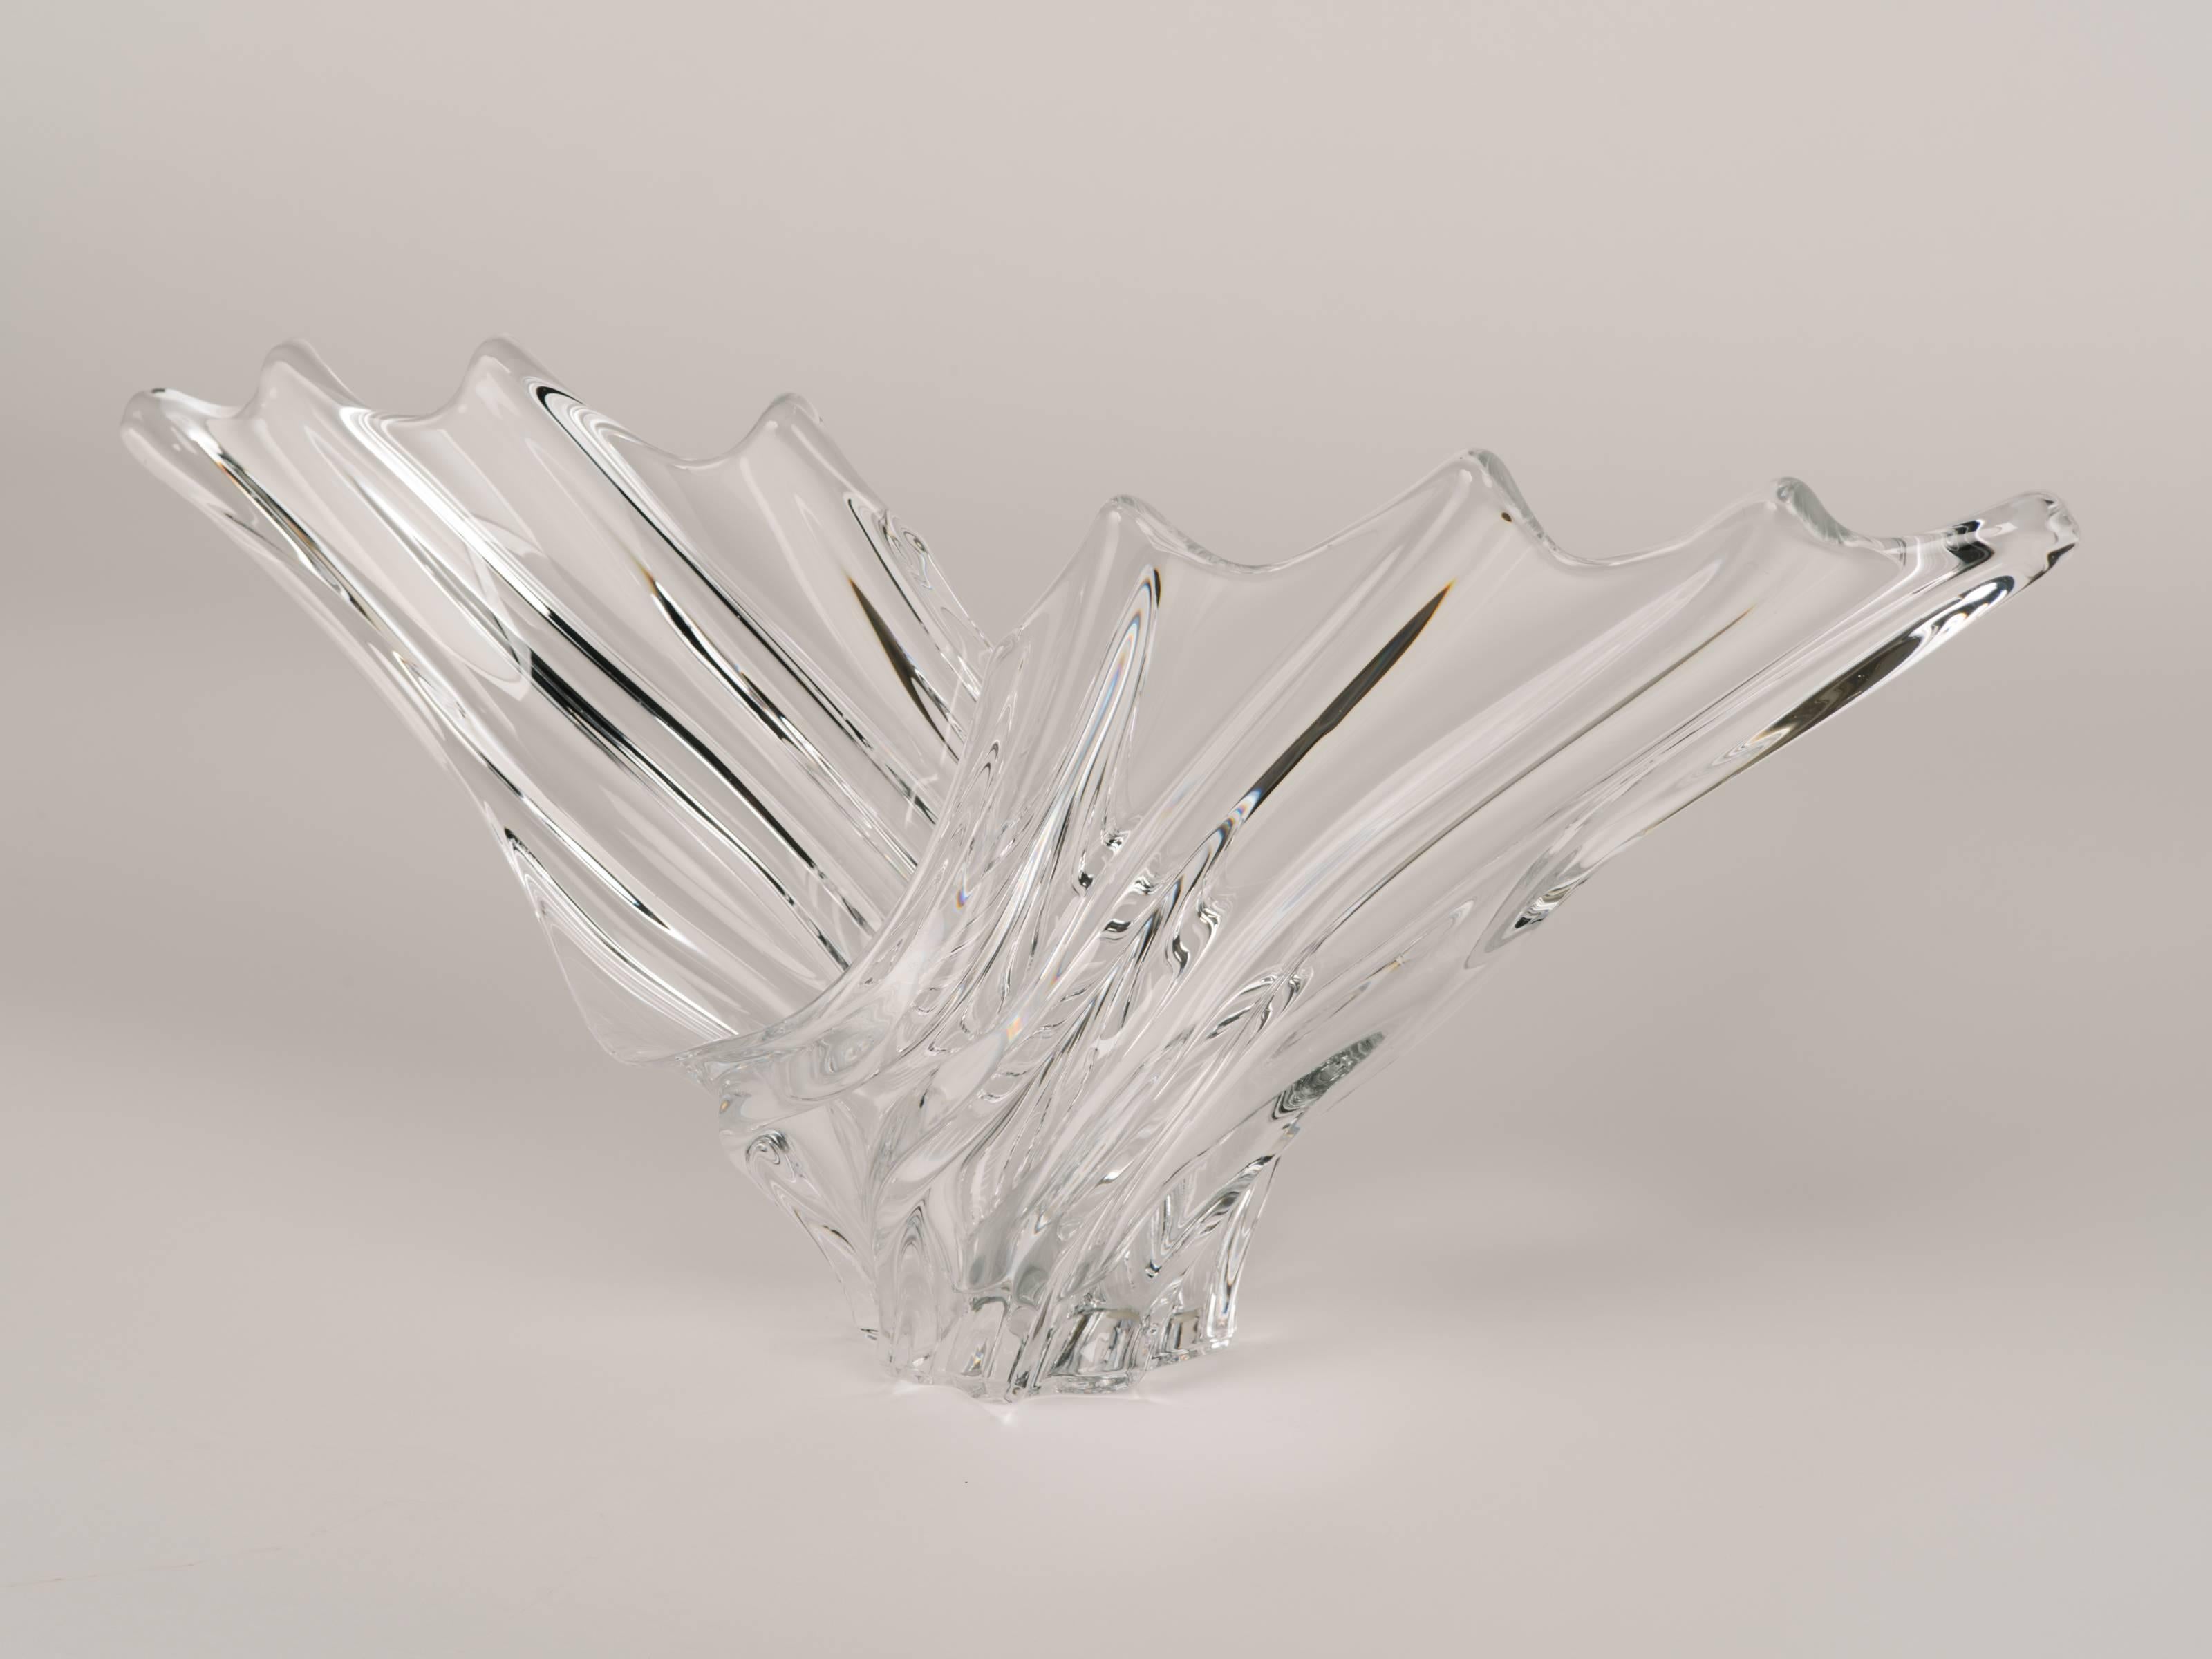 Large Mid-Century Modern crystal centerpiece bowl or vase with amorphous wave or wing formation . Exquisitely handblown and signed Art Vannes, France on the underside.
 